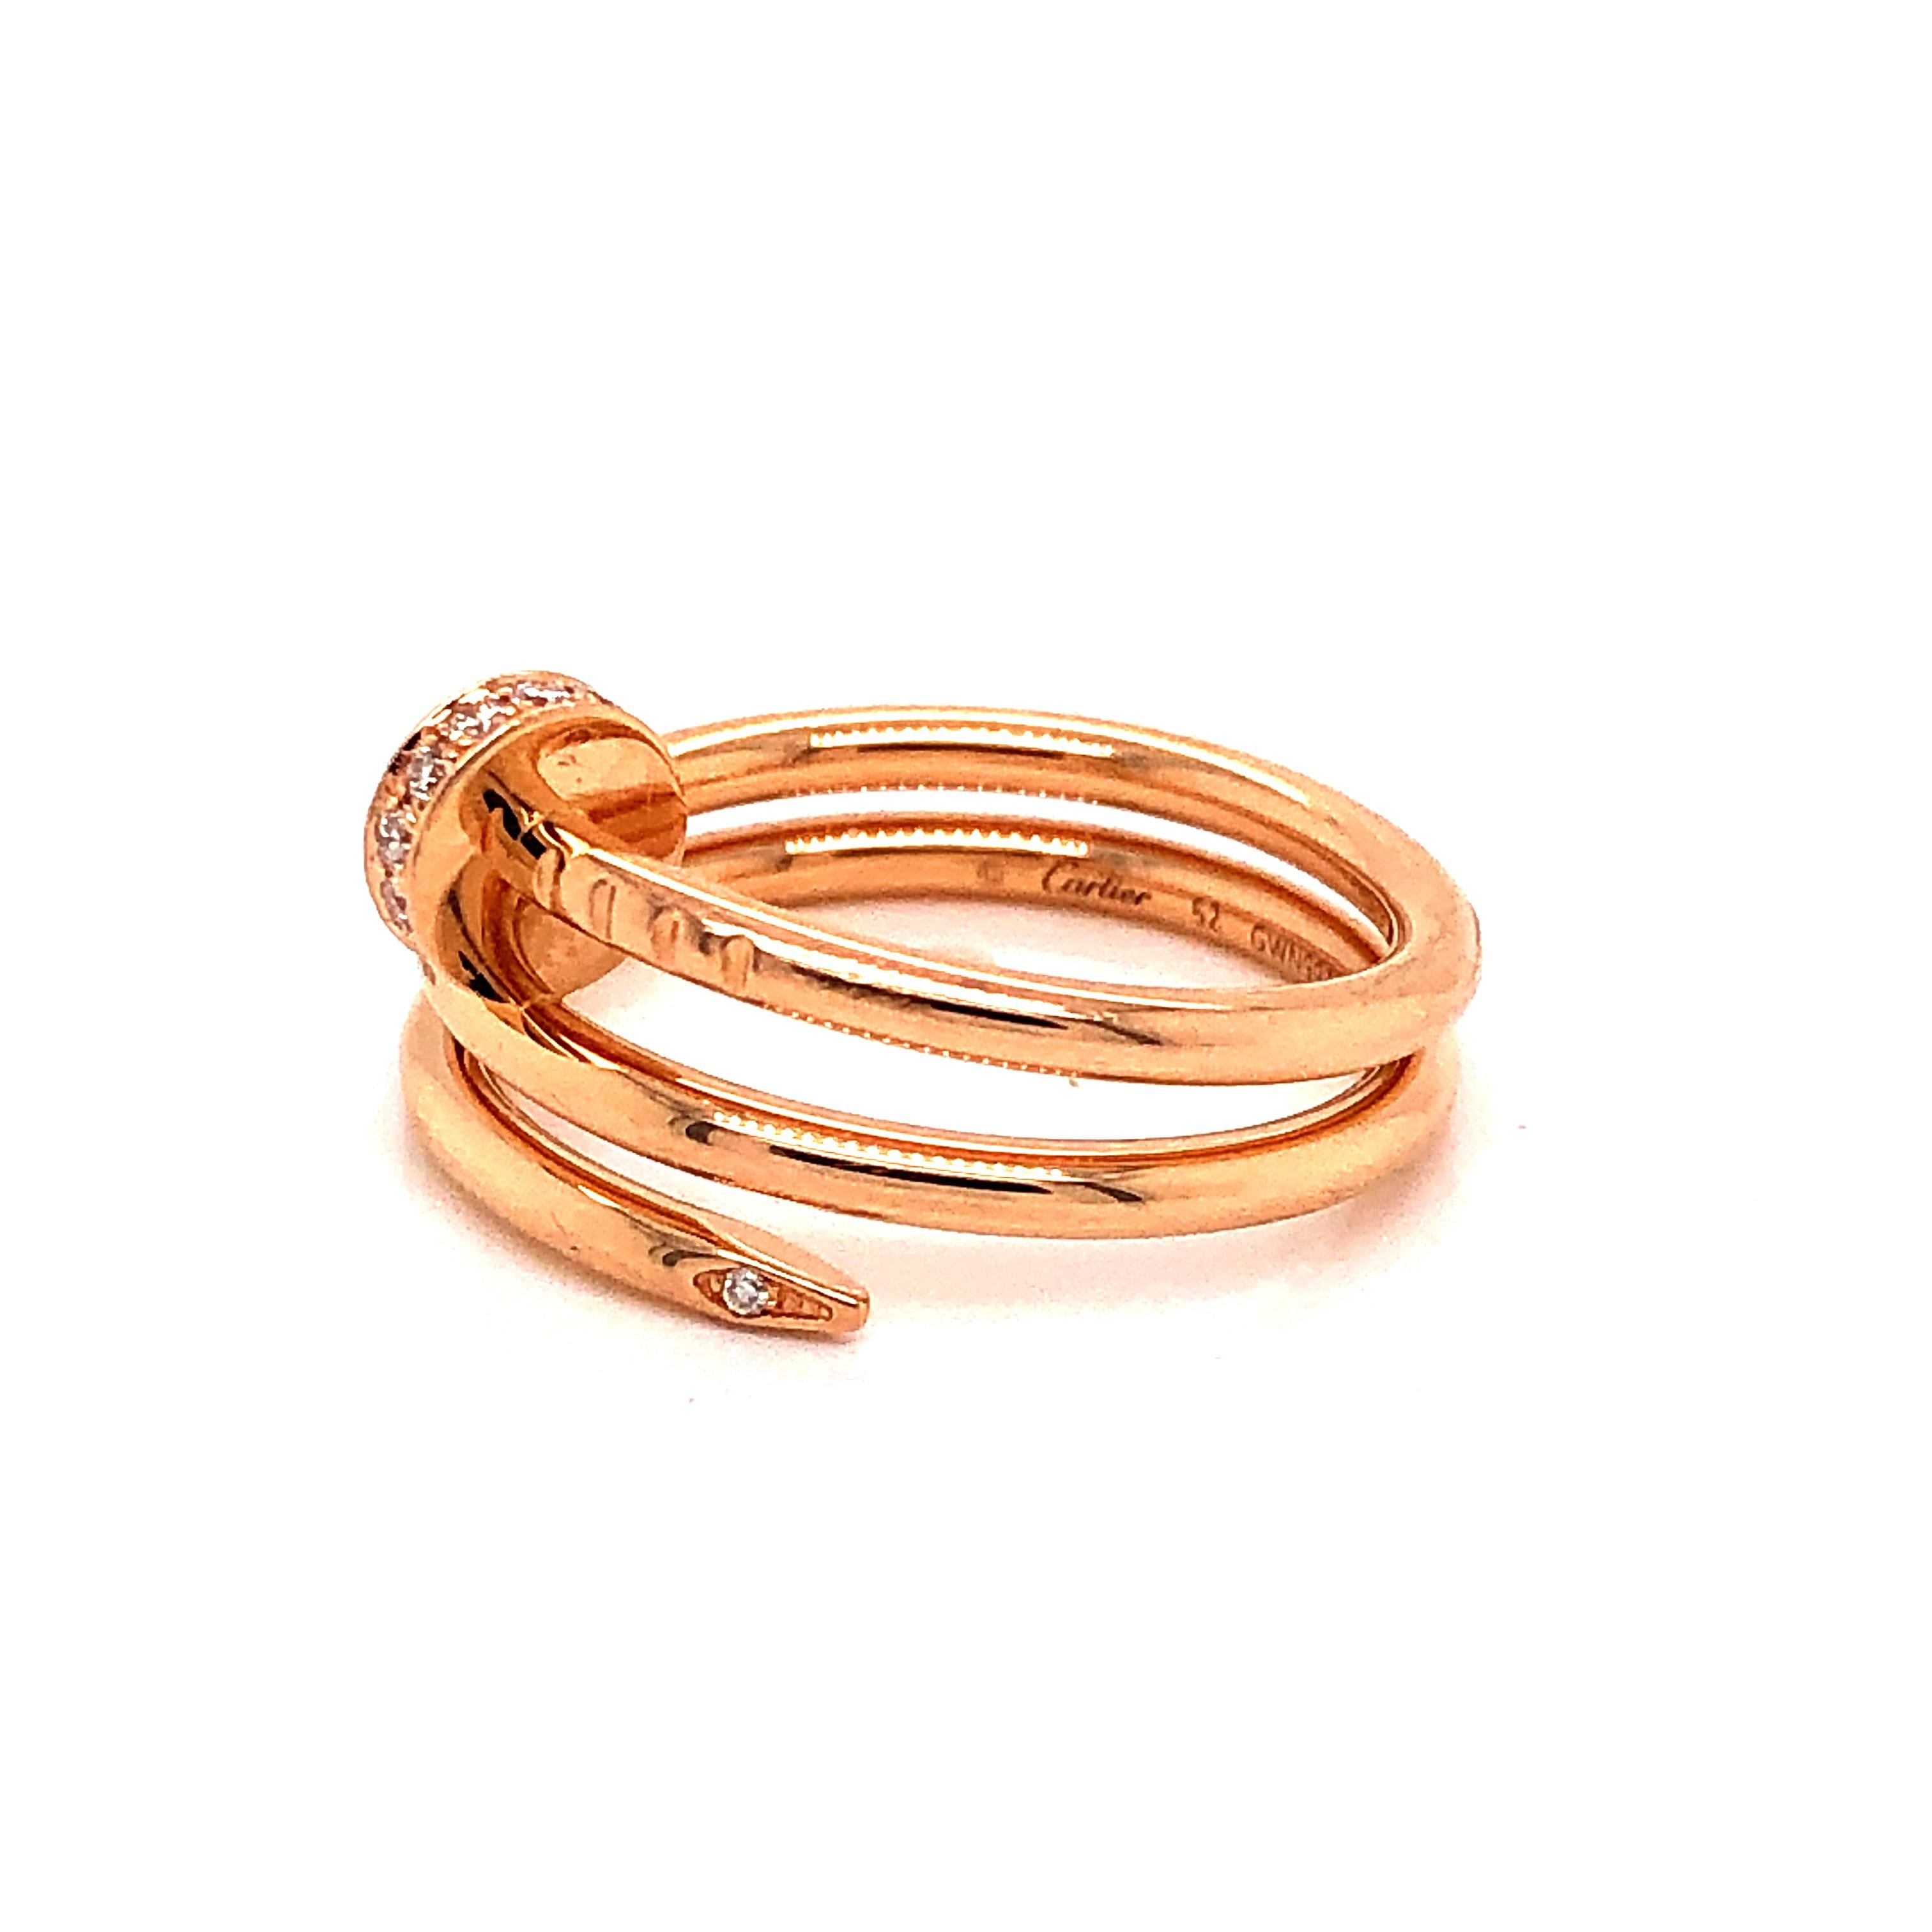 This remarkable rose gold ring set with diamonds from the brand's Juste Un Clou collection coils elegantly around your finger with just the right amount of style and edge. Crafted from 18-karat rose gold, this piece reflects the rebellious streak of